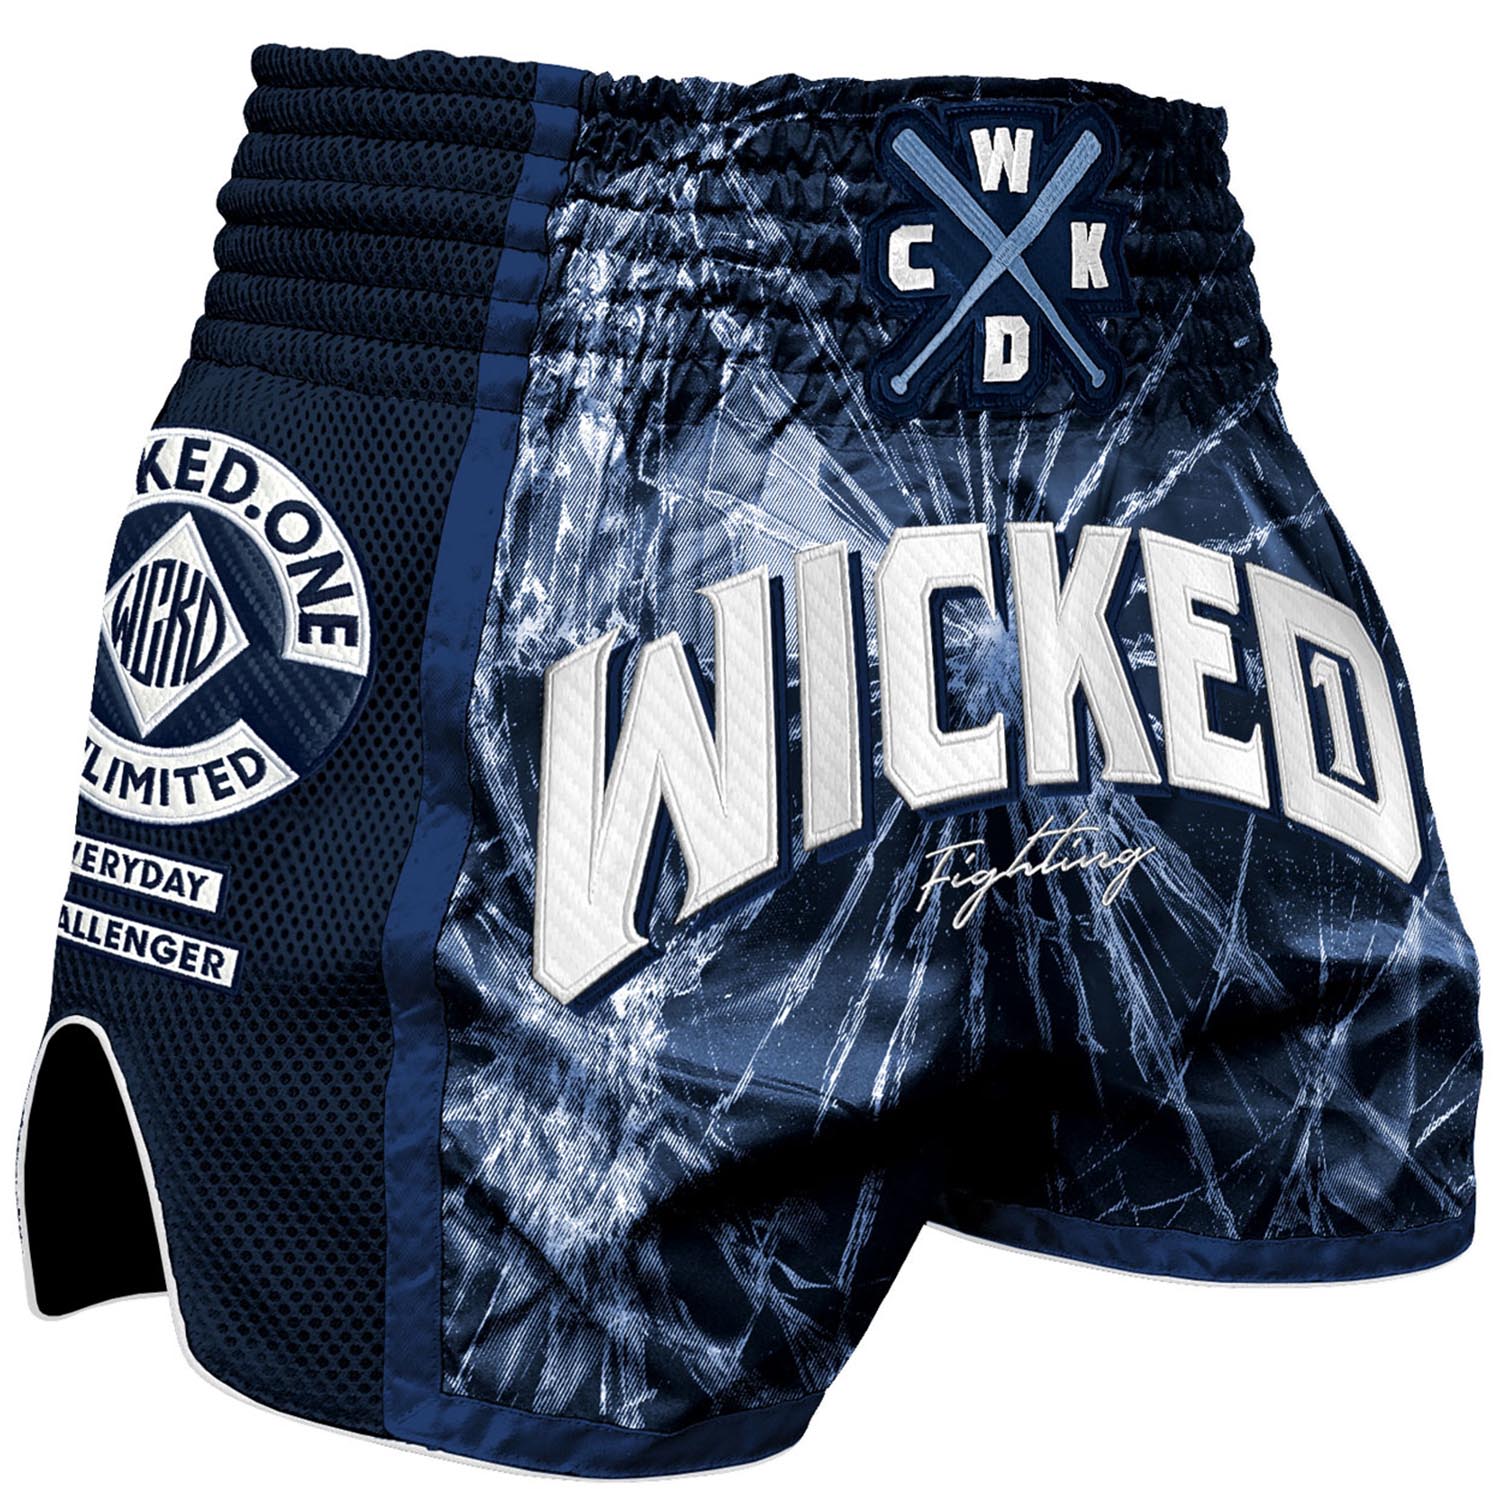 Wicked One Muay Thai Shorts, Trouble, navy, L